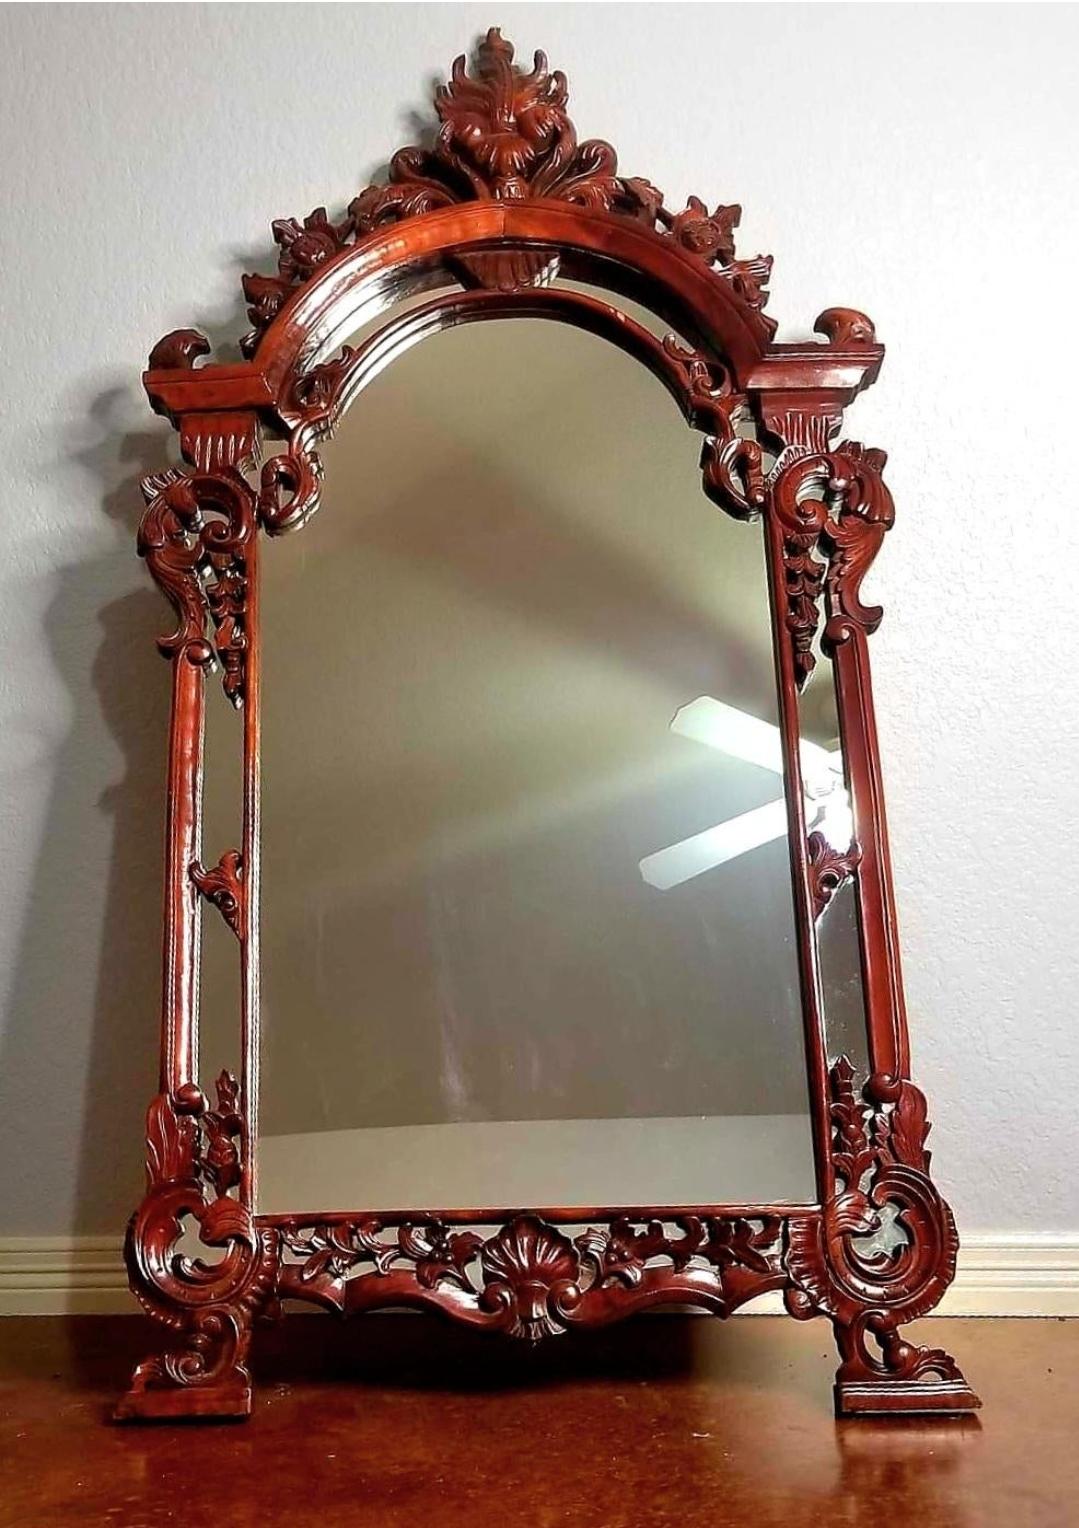 Handmade in Indonesia.
Elegantly handcarved ornanate mahogany.
Footed floor leaner or wall mirror.
Brings character to any room.
Chinoiserie. 
Chippendale. 
Gothic. 